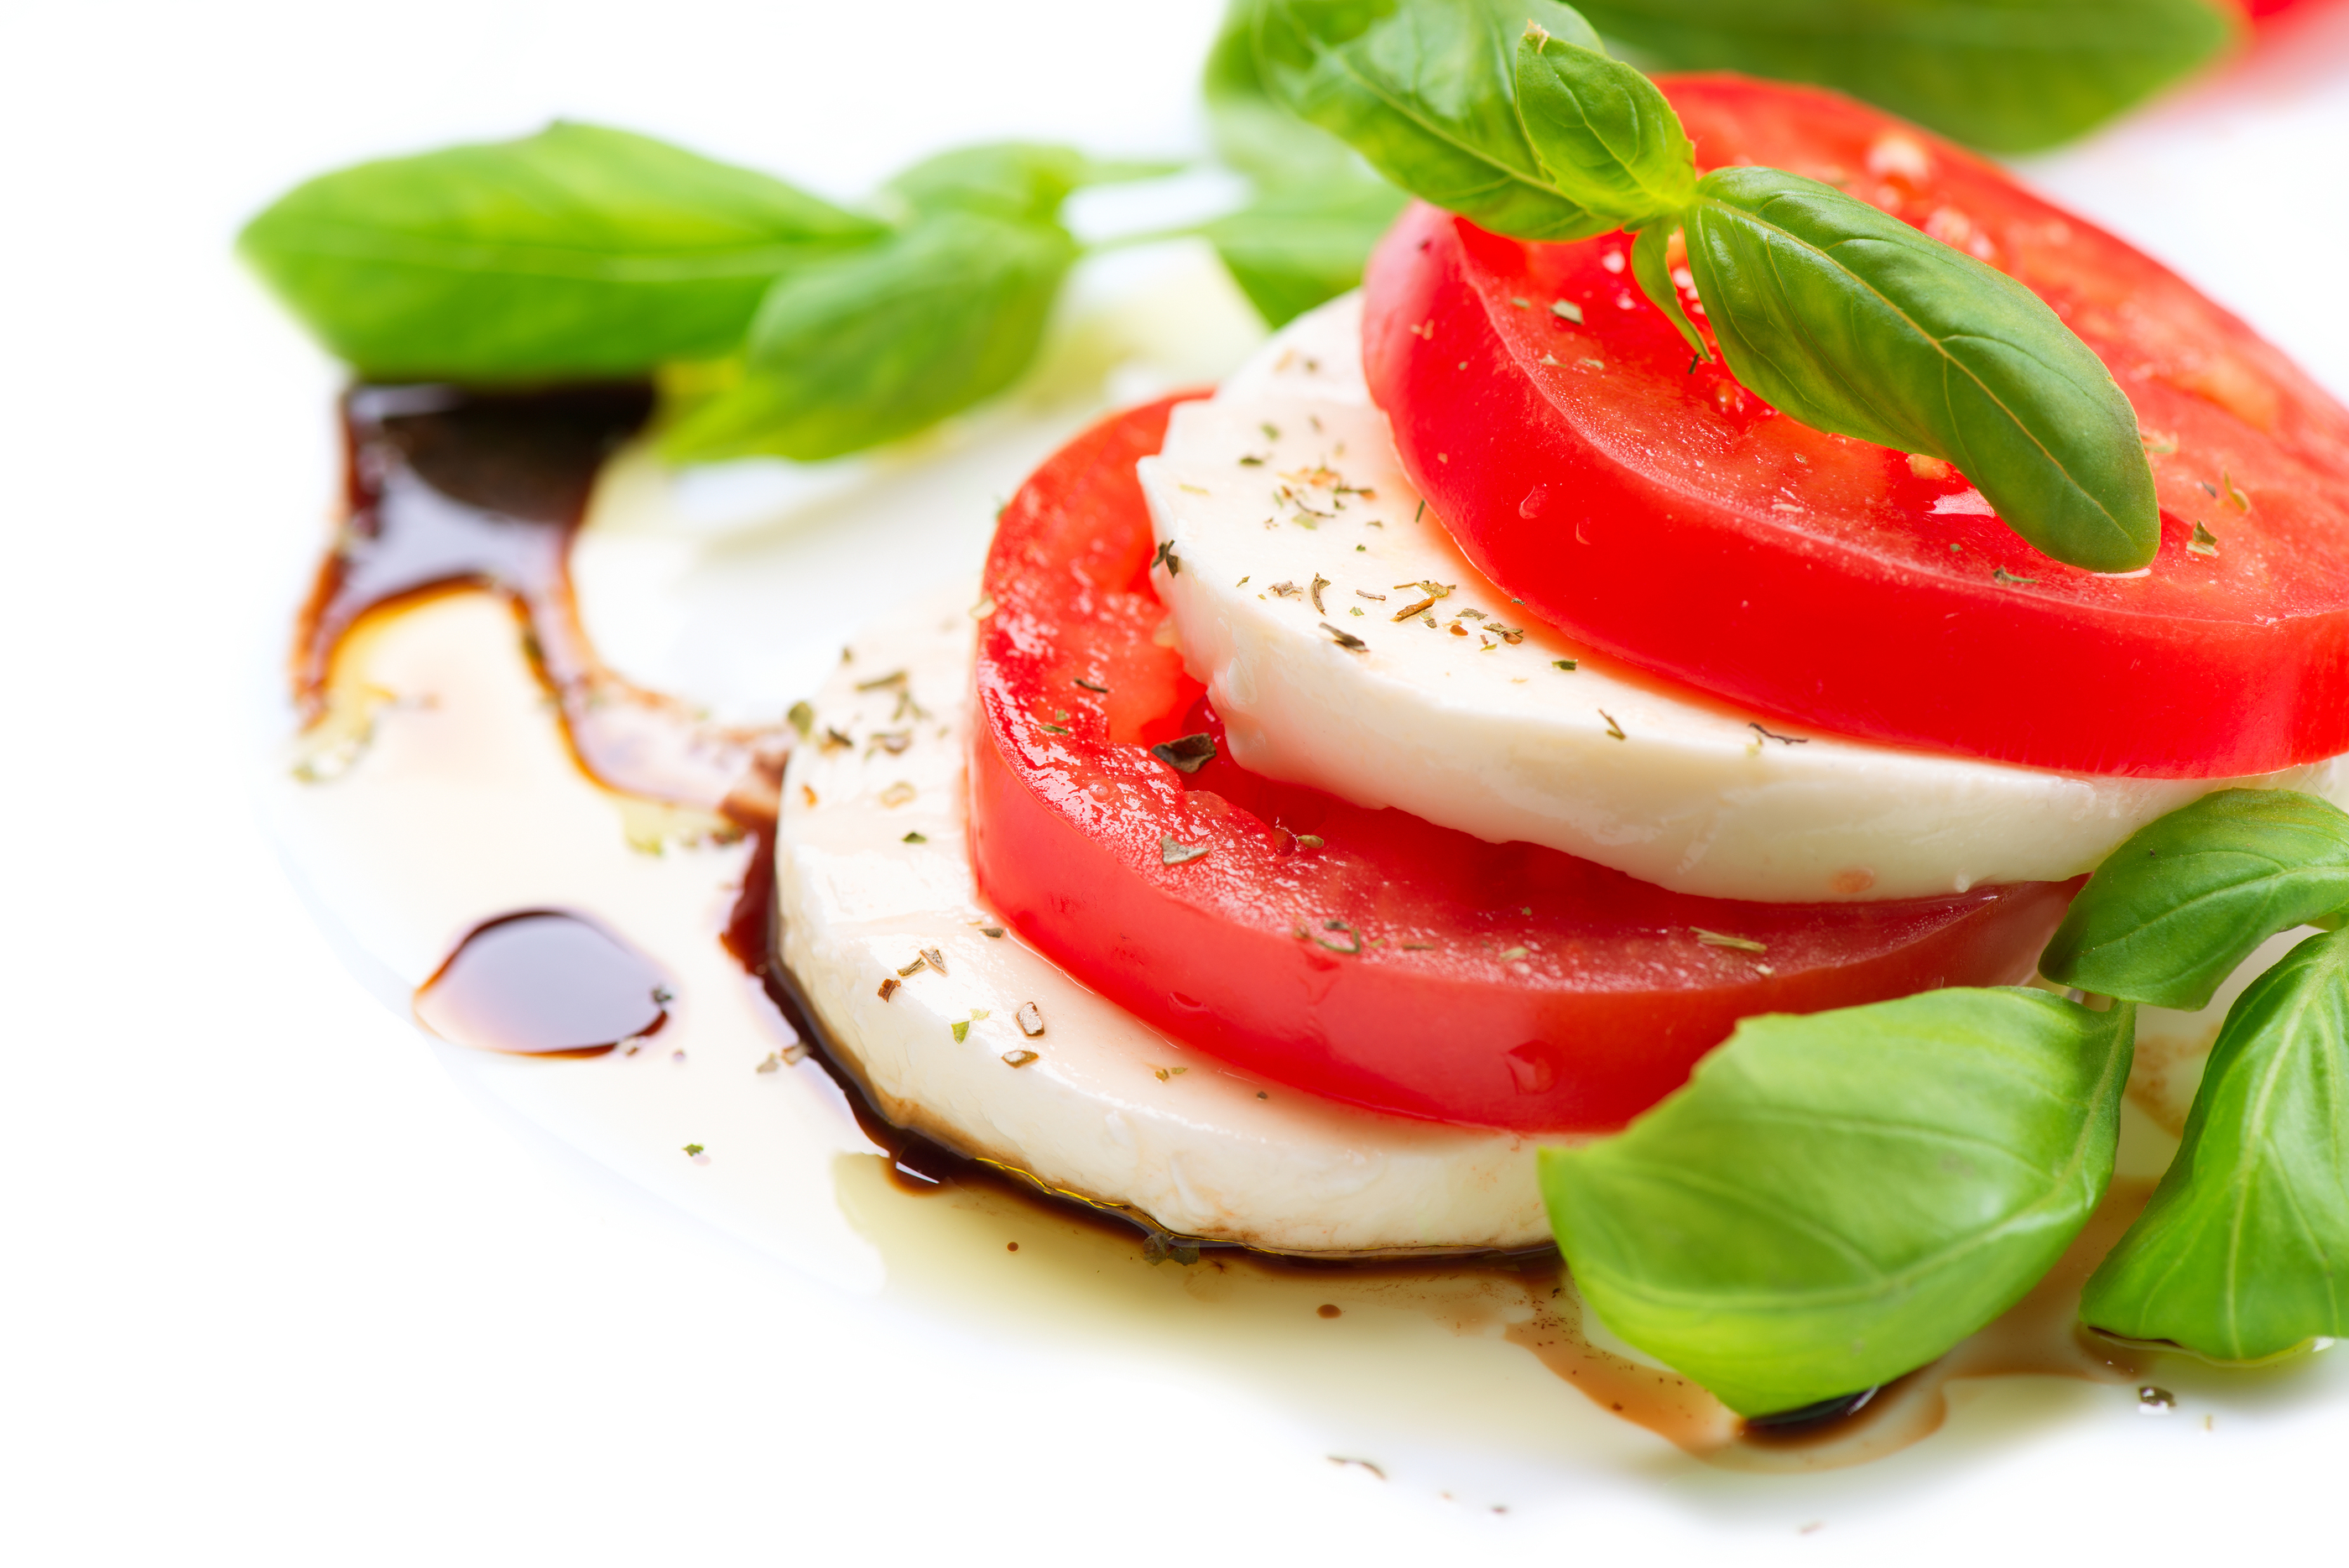 Caprese Salad. Tomato and Mozzarella slices with basil leaves. Over white background